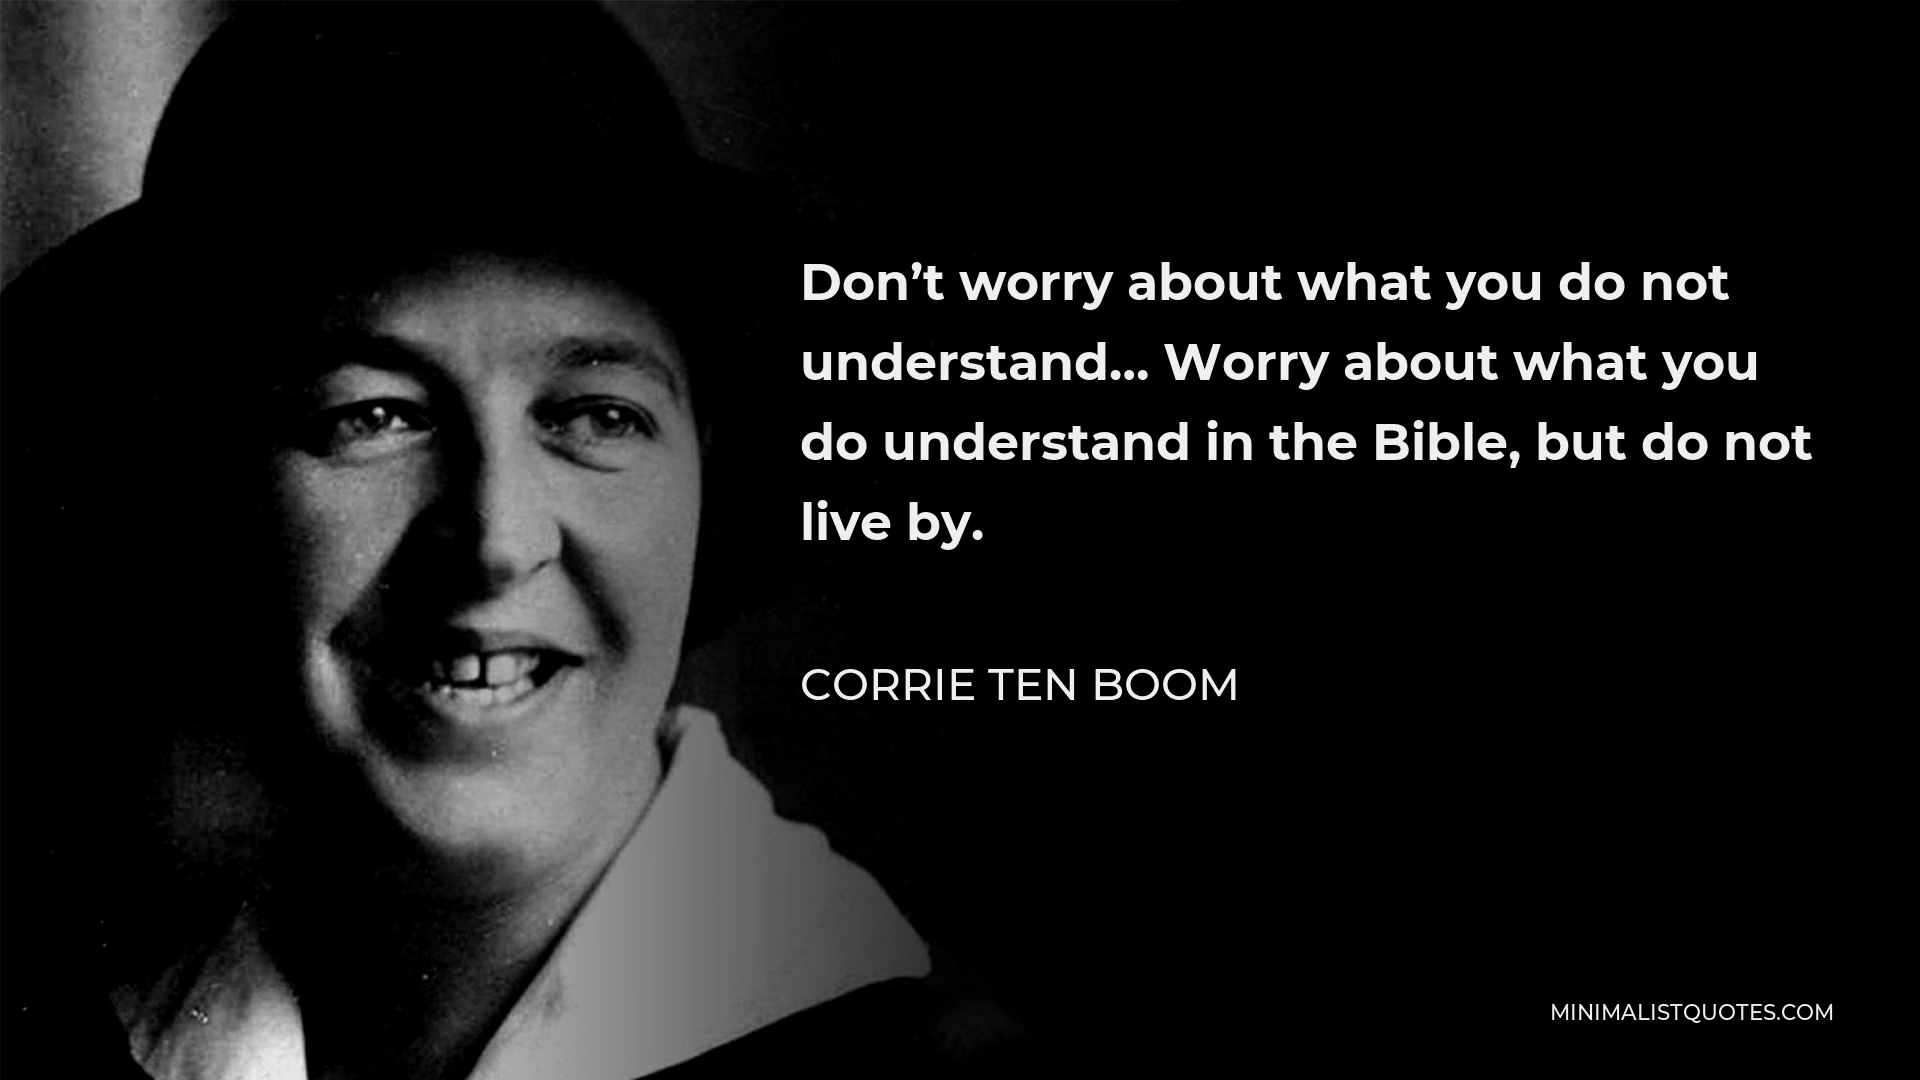 Corrie ten Boom Quote - Don’t worry about what you do not understand… Worry about what you do understand in the Bible, but do not live by.